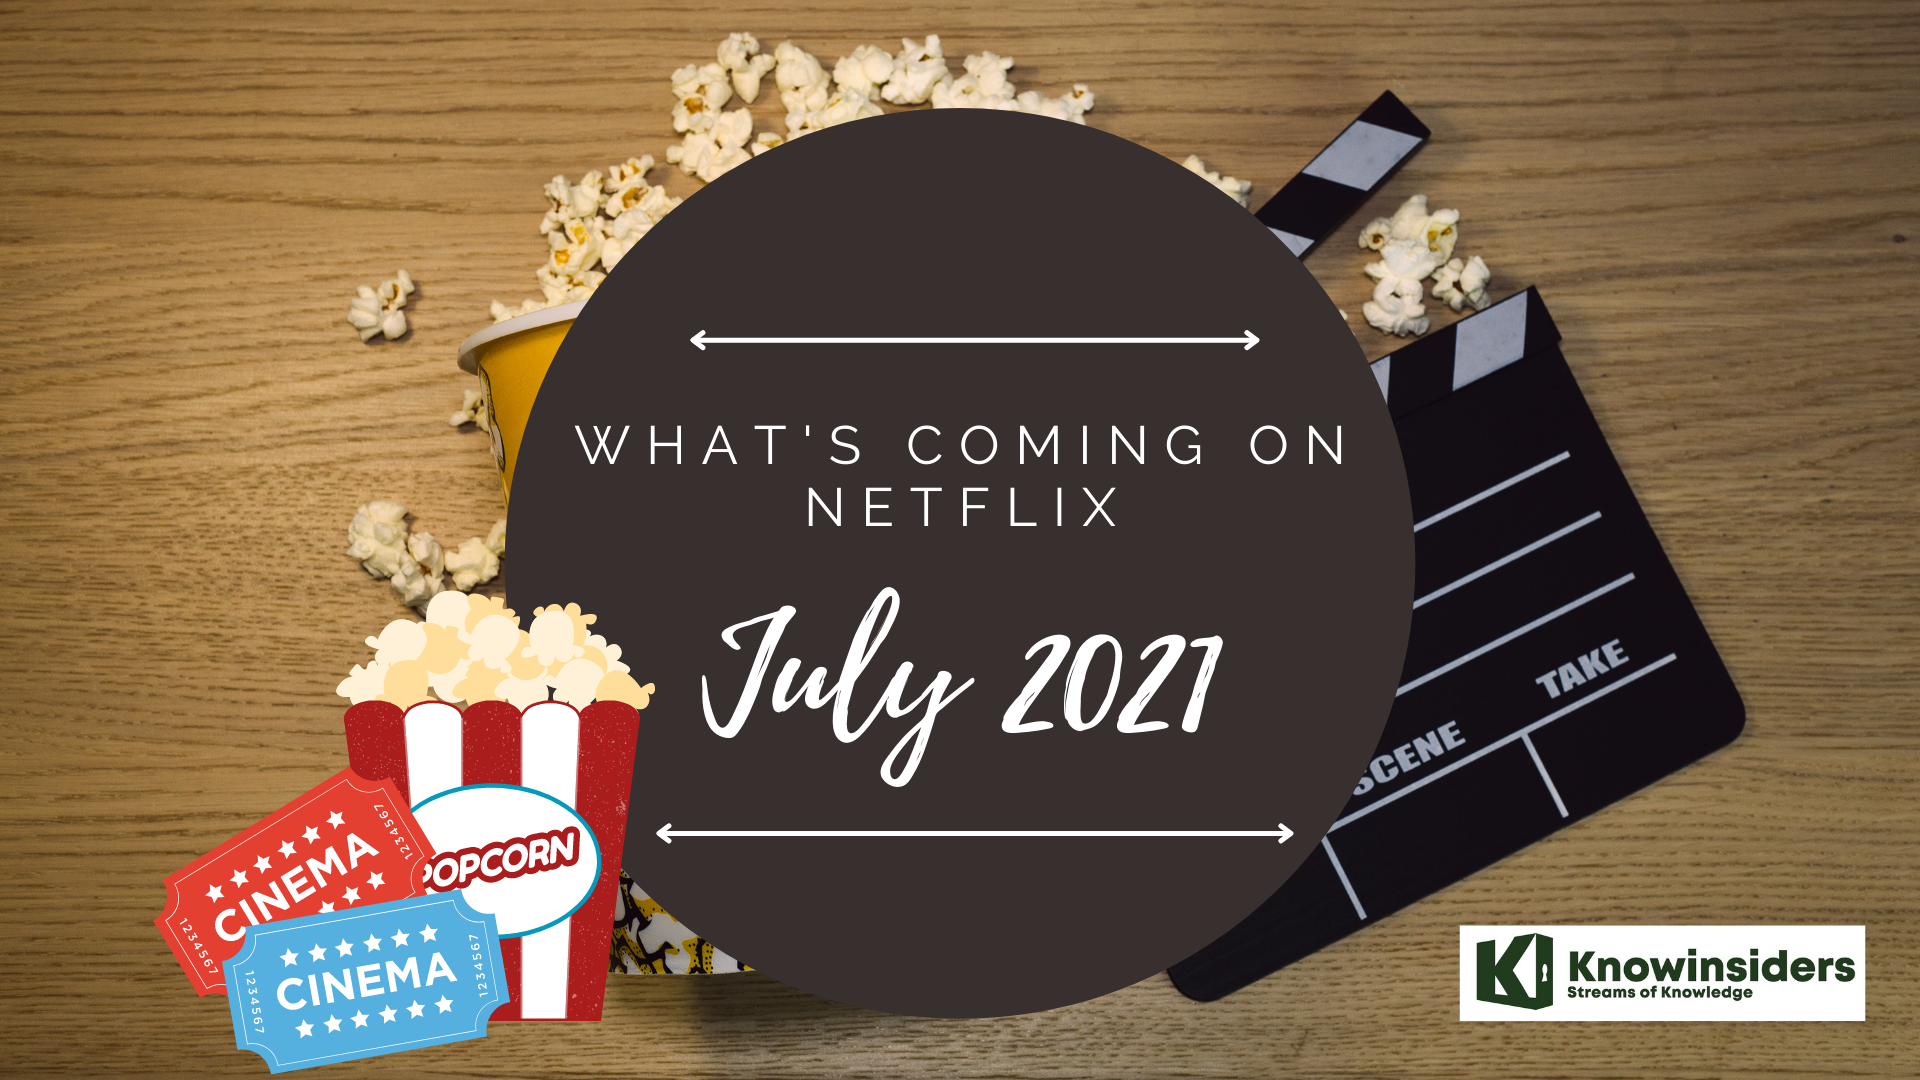 Netflix in July 2021 -The Full List Movies and Shows